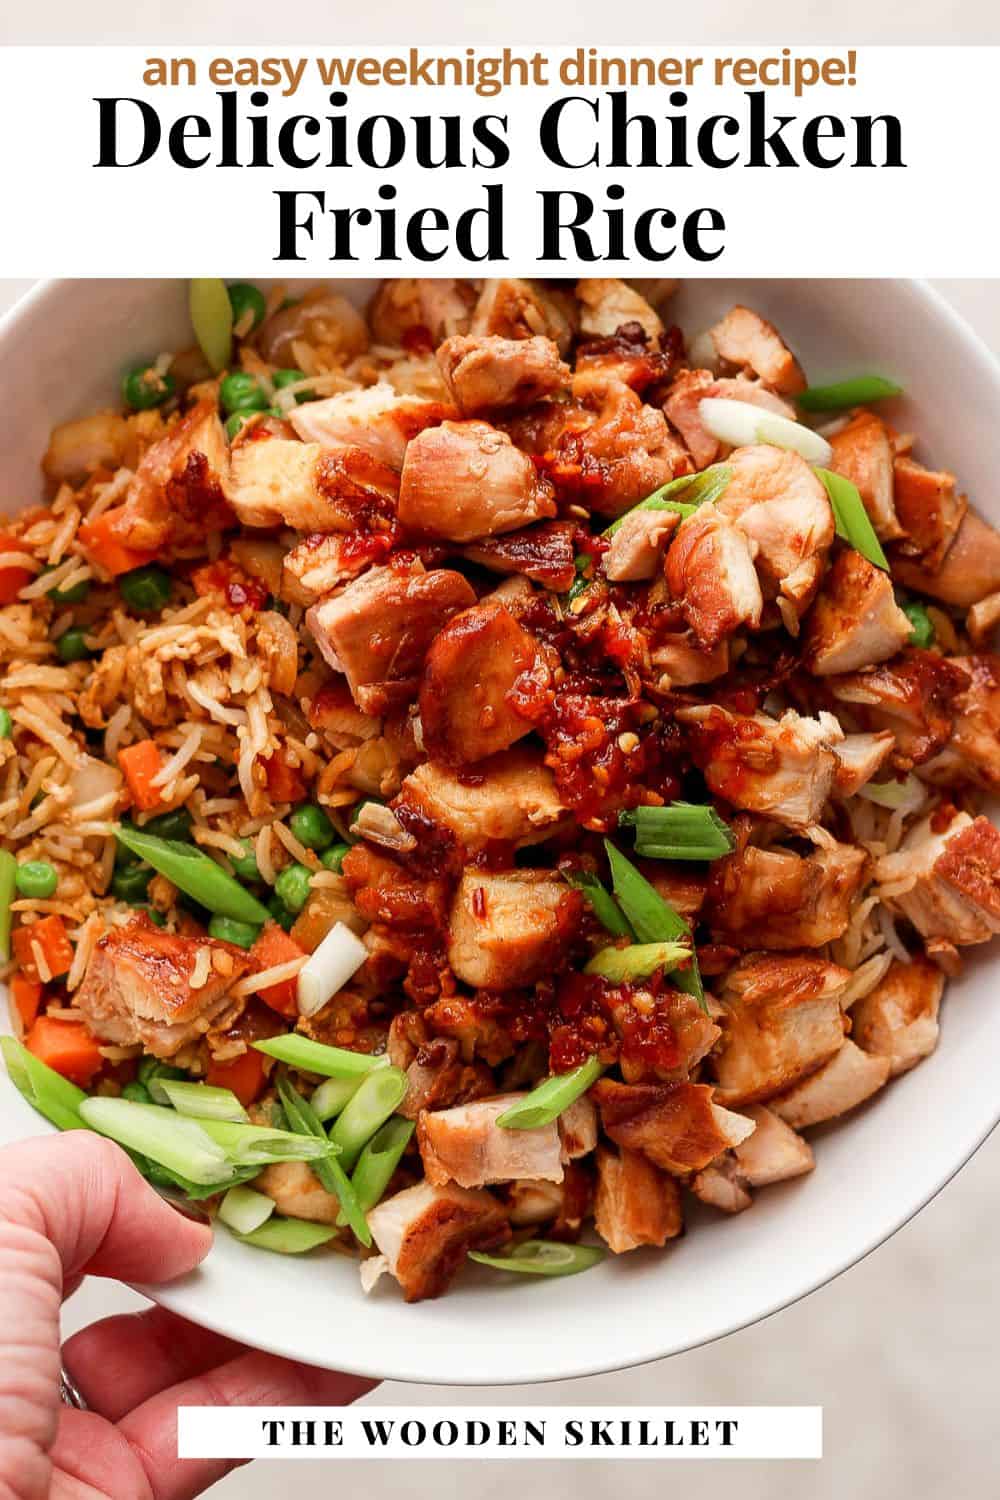 Pinterest image showing chicken fried rice in a bowl with the title "An easy weeknight dinner recipe! Delicious chicken friend rice."